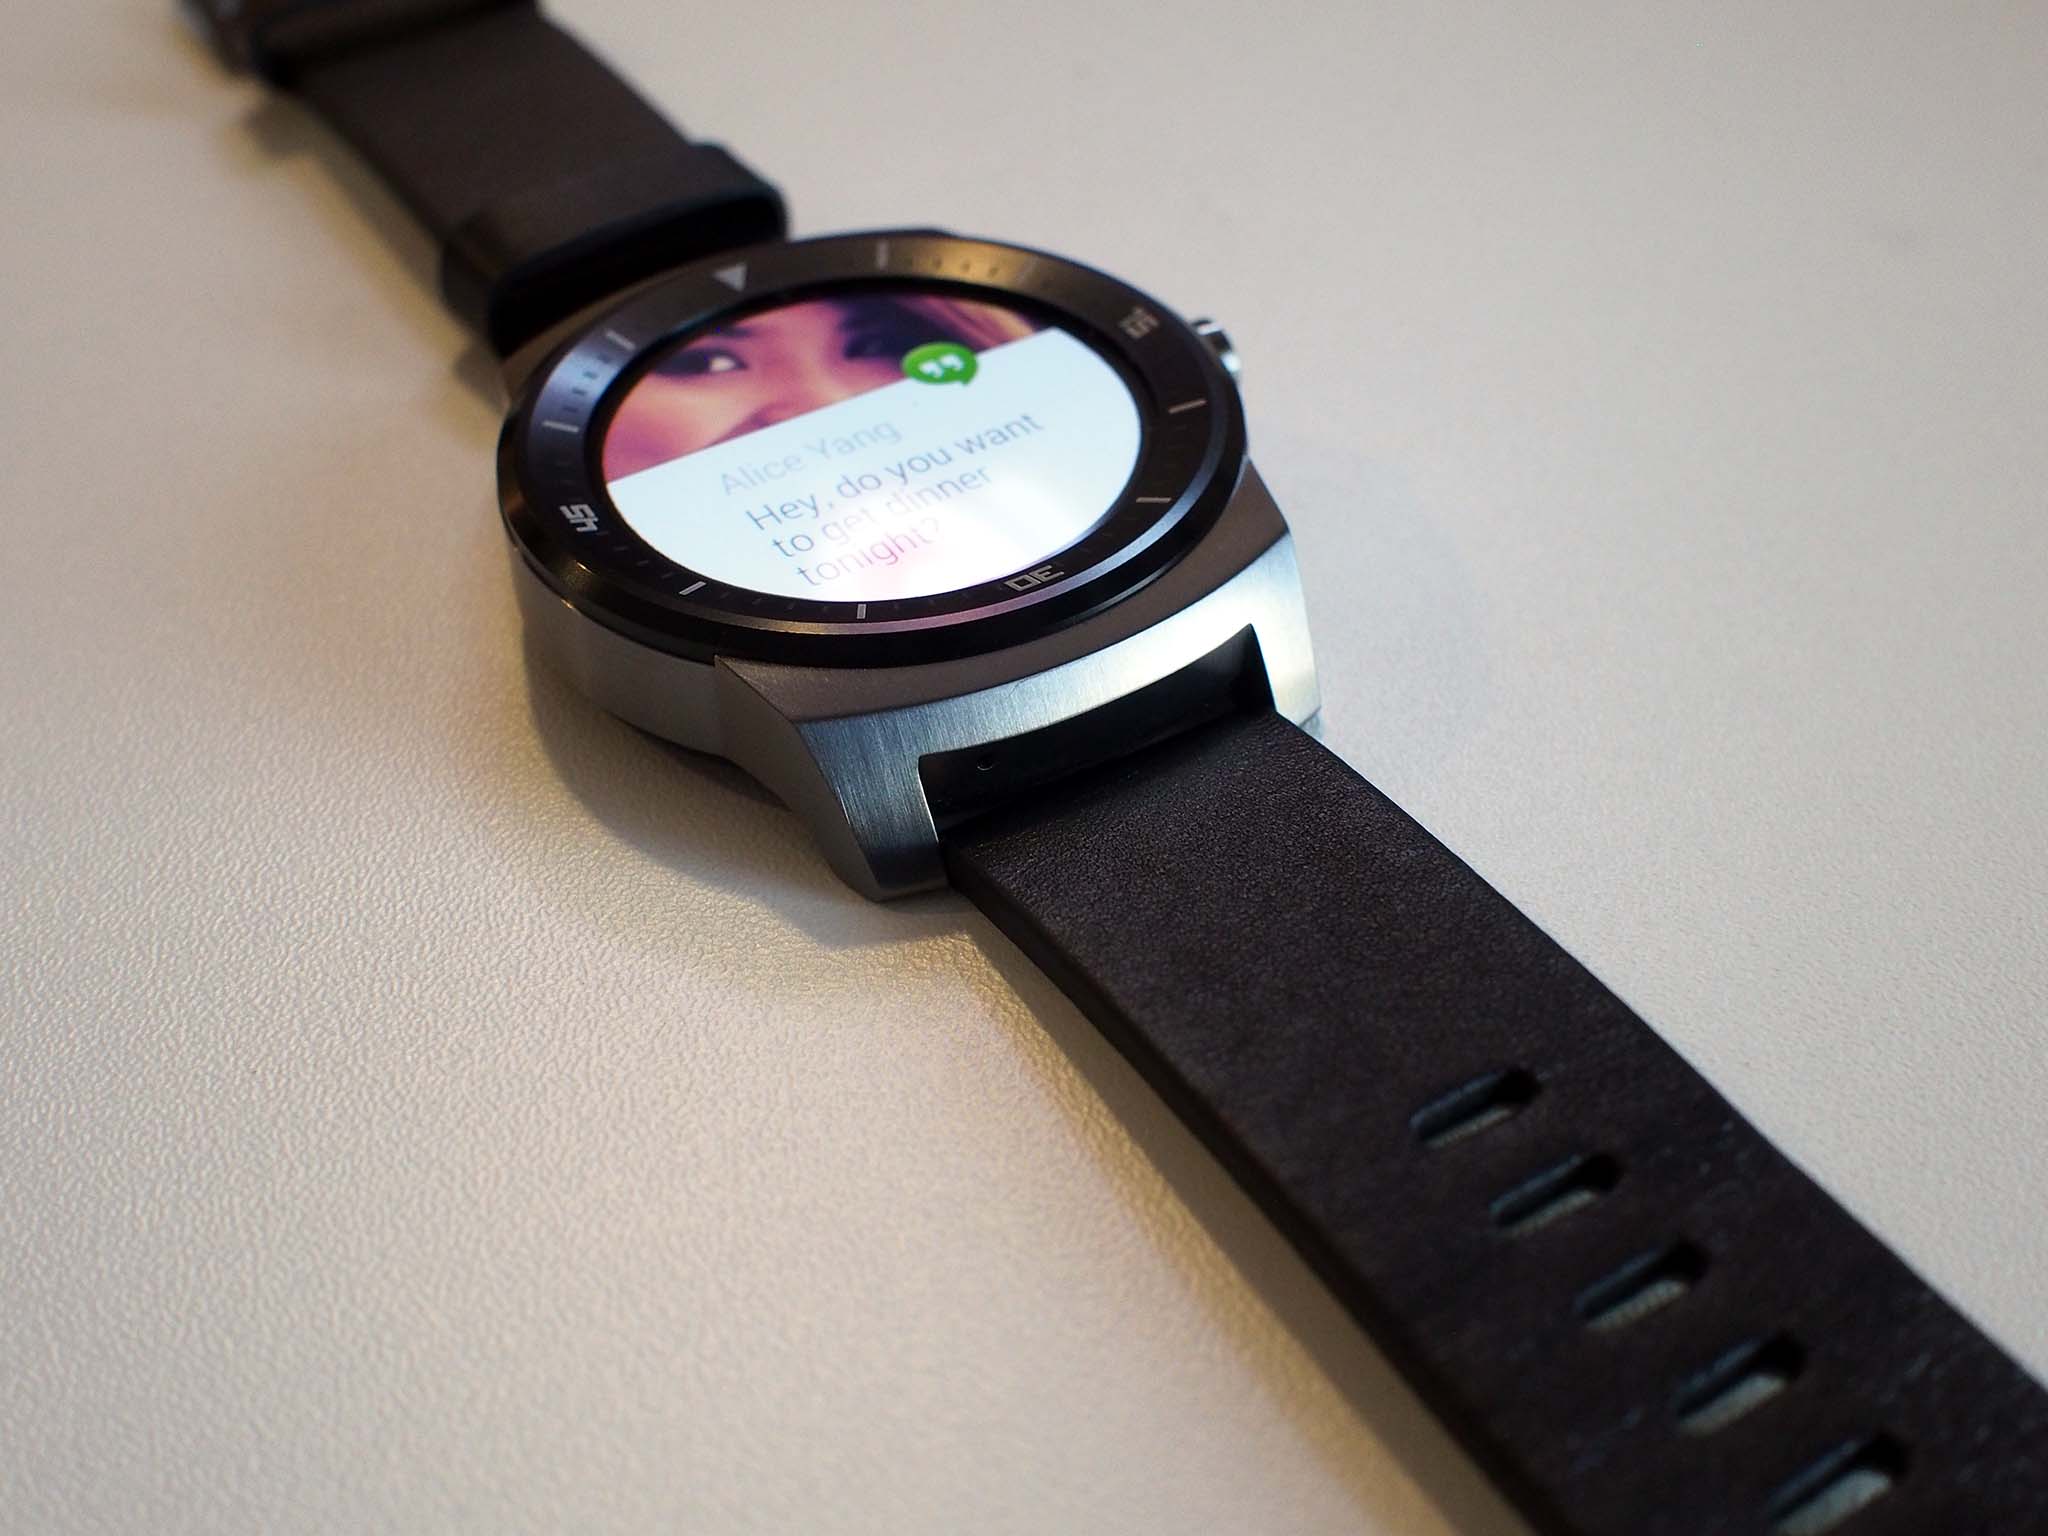 LG confirms circular G Watch R launching in Korea on Oct. 14